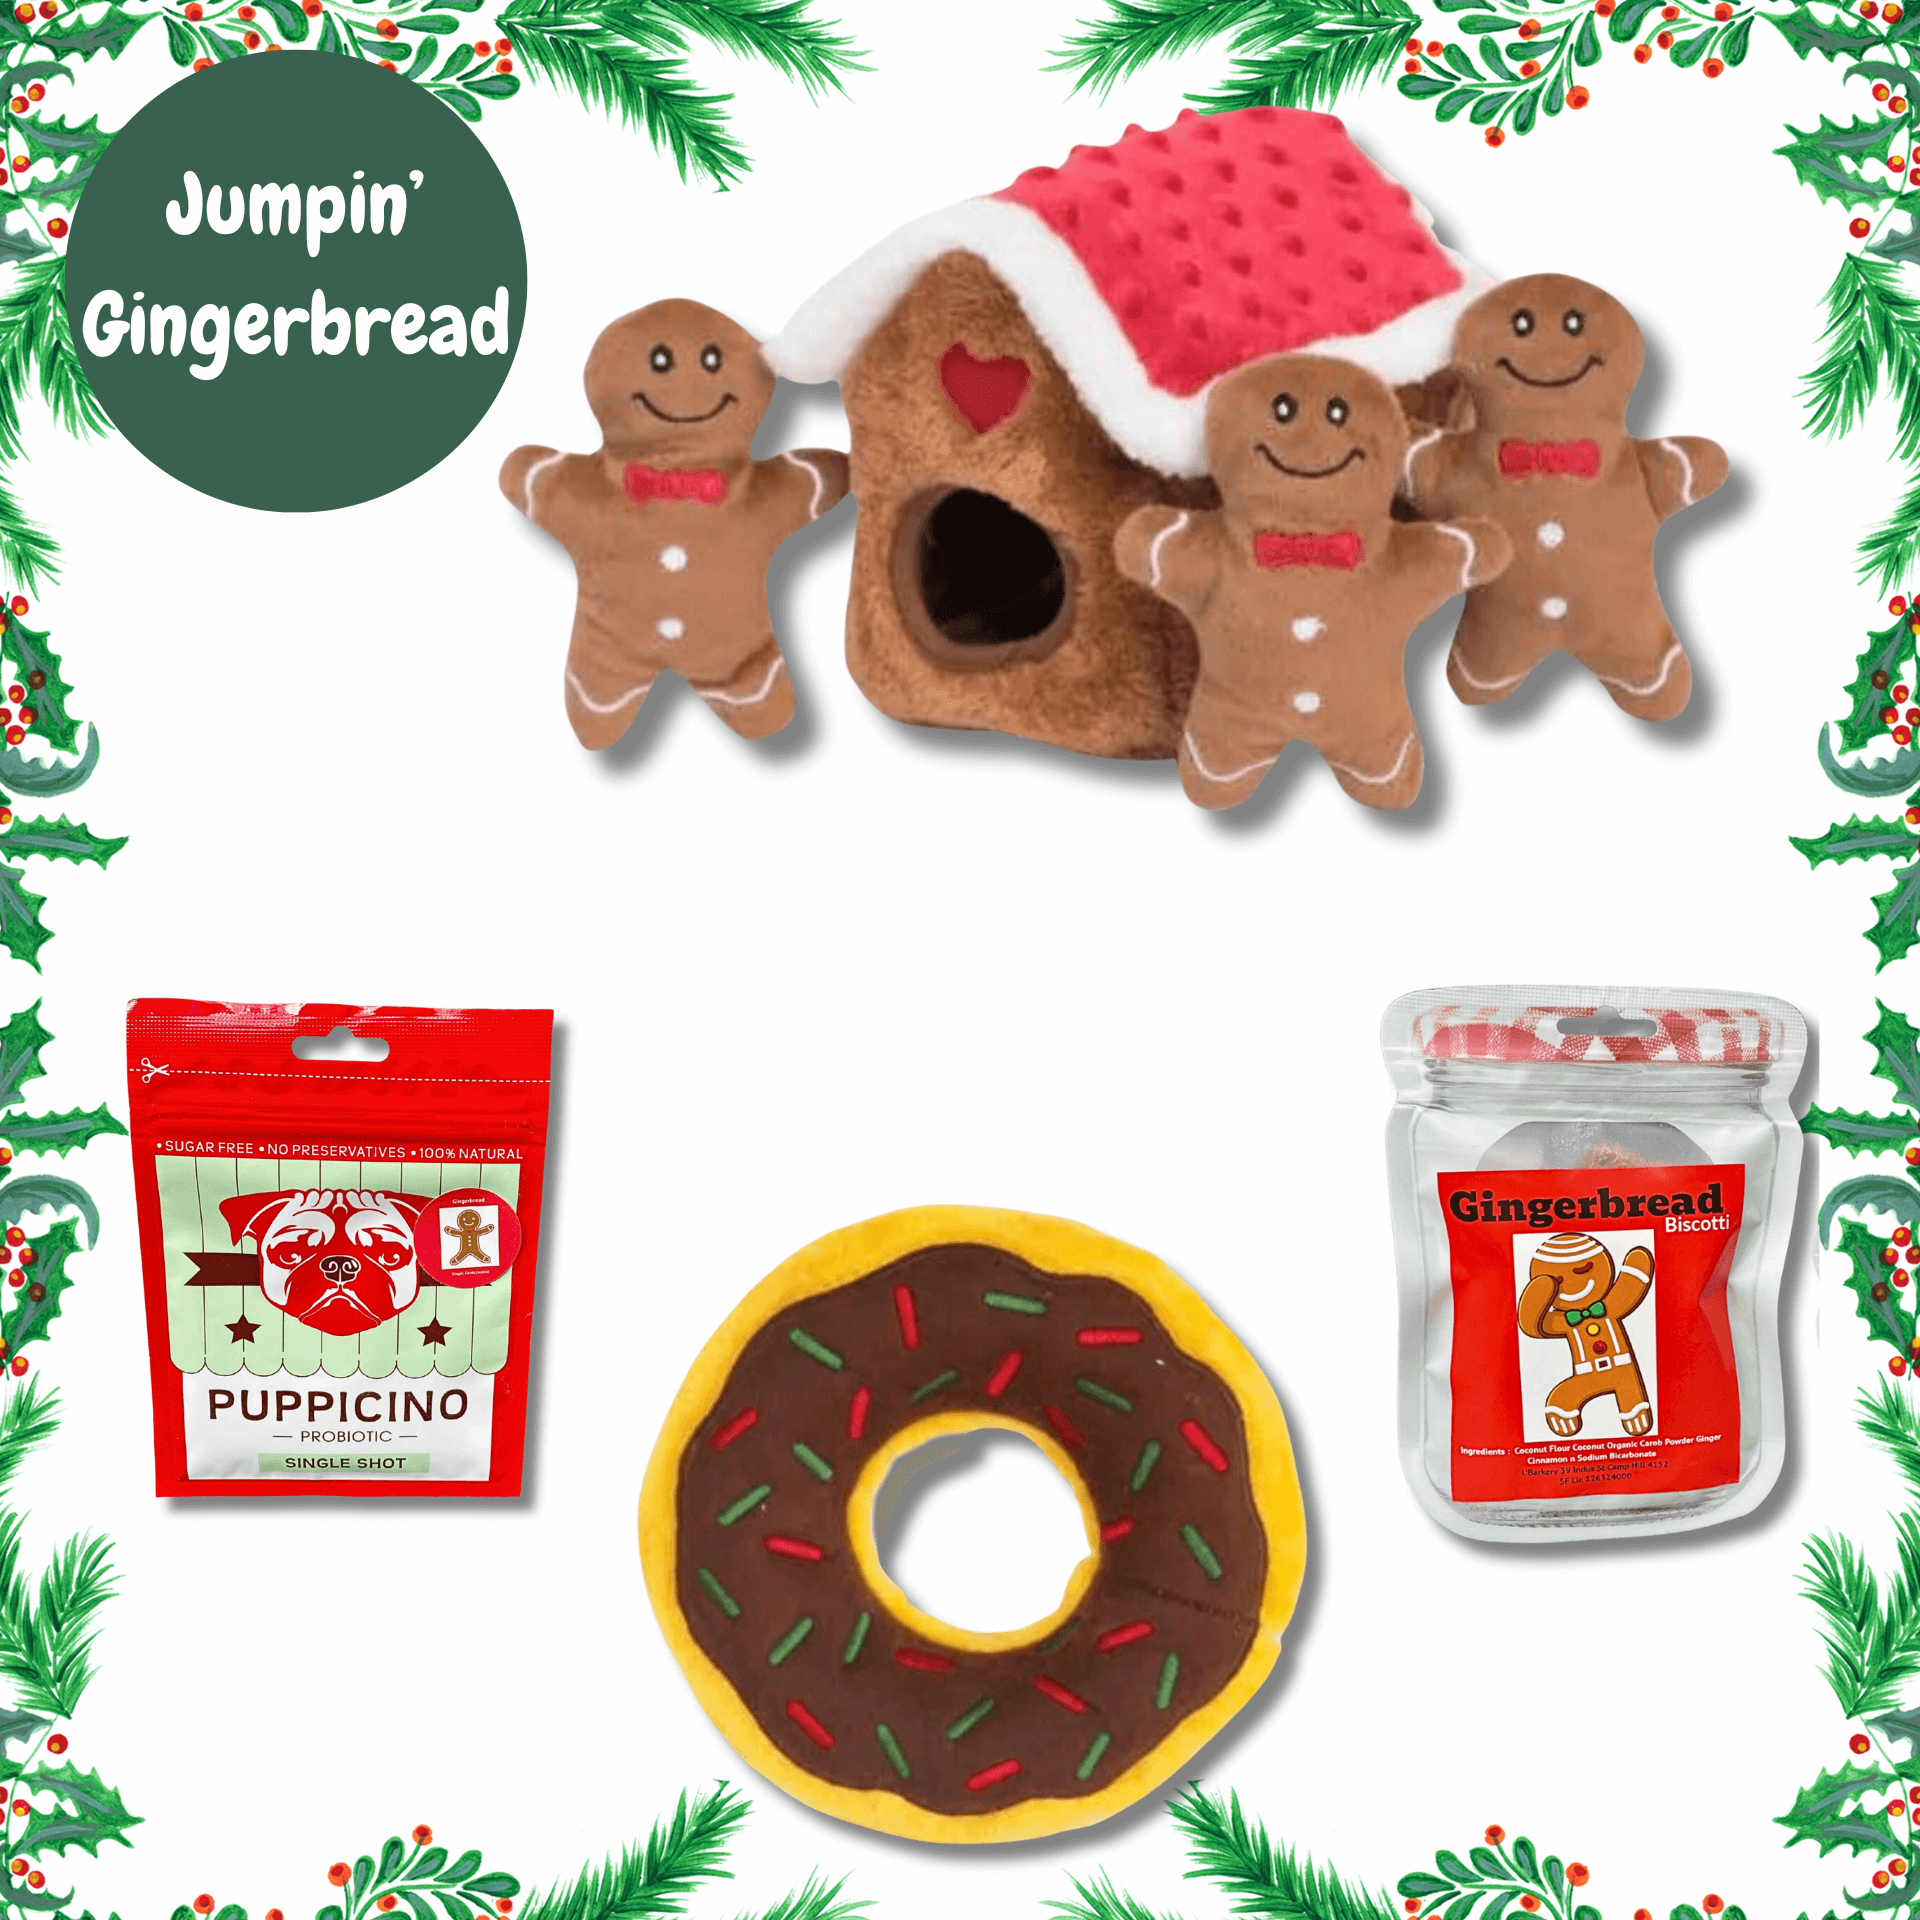 Christmas themed dog gift box, gingerbread, interactive dog toy, dog treat, let's pawty, personalised gift box